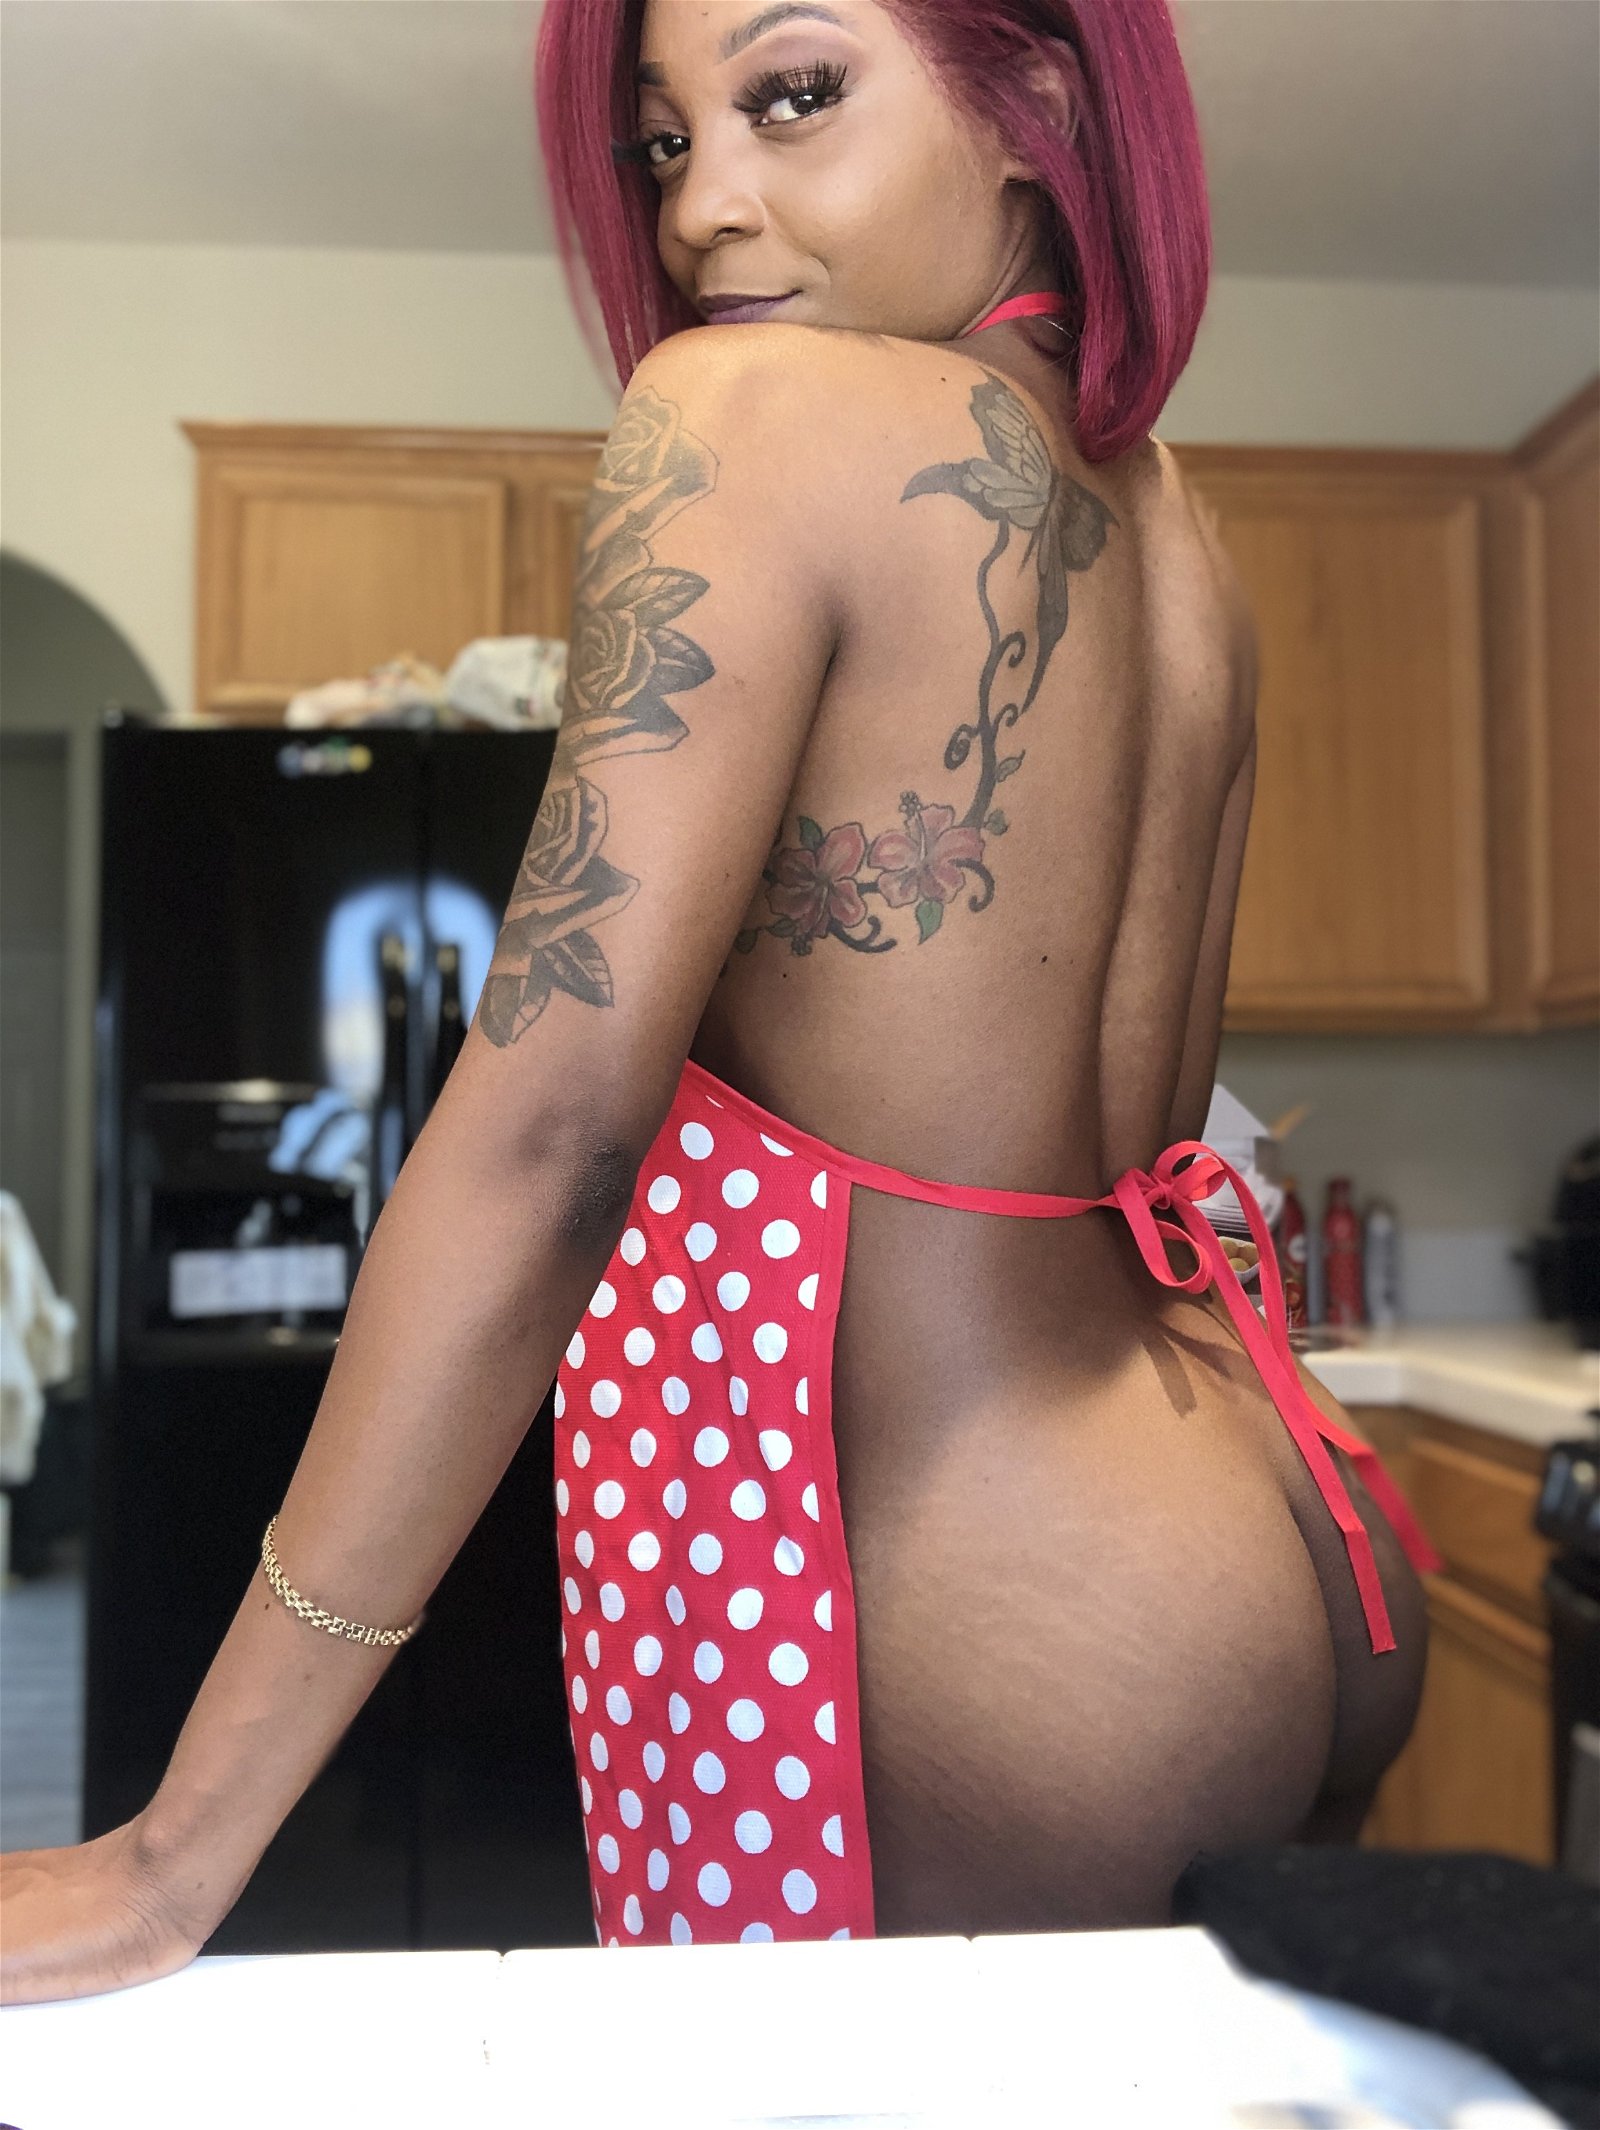 Photo by GoddessLexc with the username @GoddessLexc, who is a star user,  October 31, 2020 at 2:25 AM. The post is about the topic Little Round Butts and the text says 'Onlyfans.com/TheLovelyLexc $3 sale'